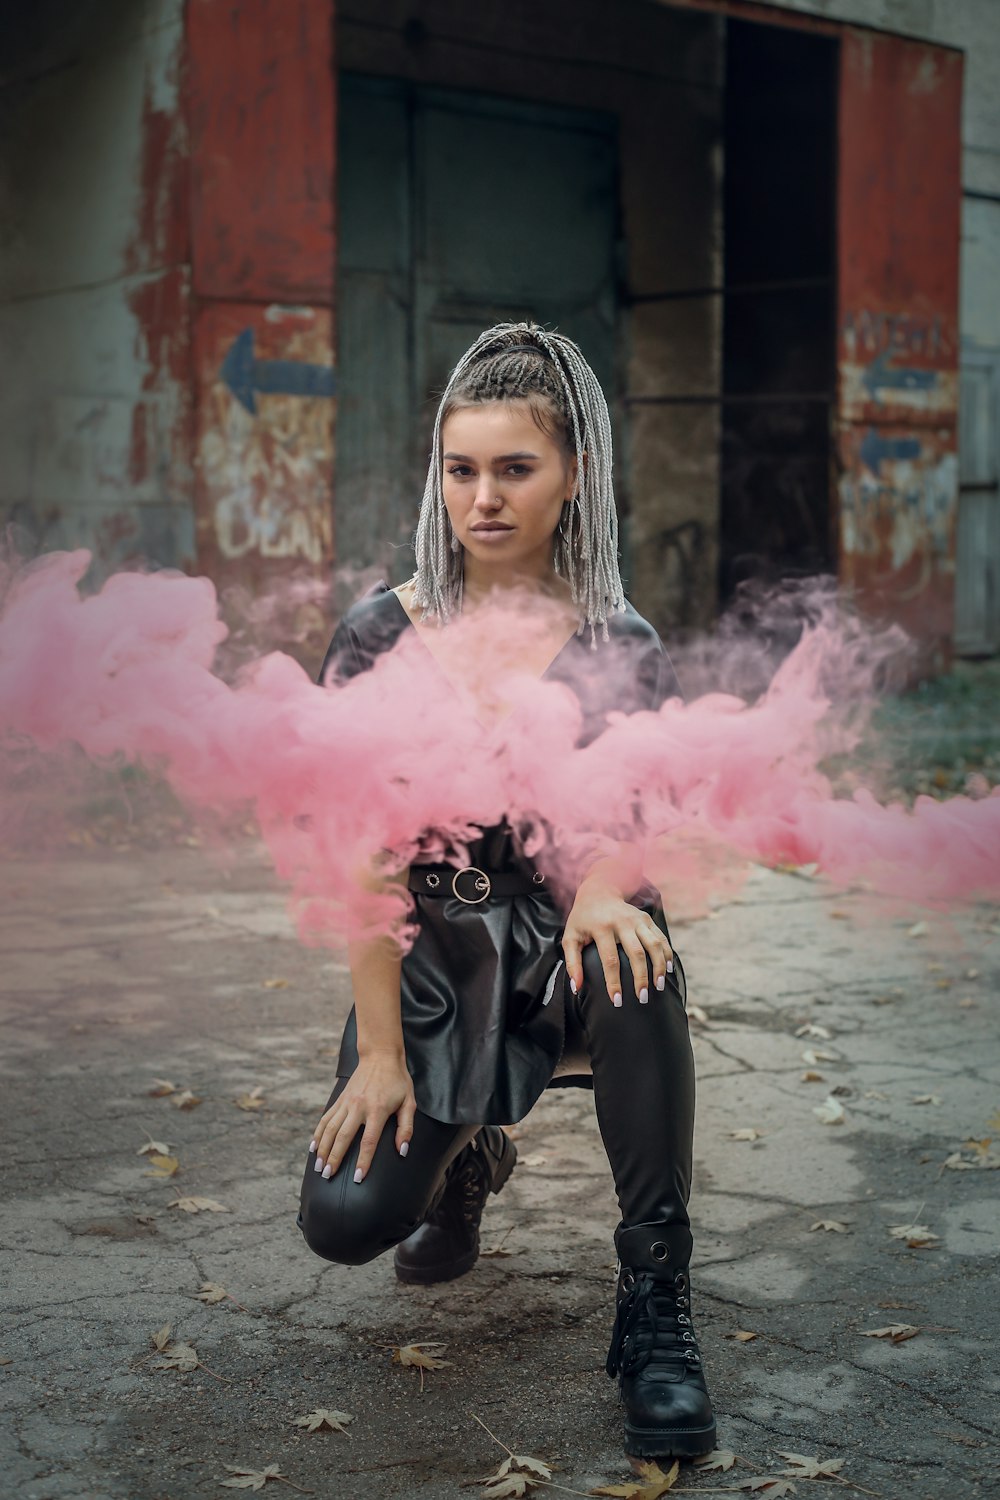 woman in black long sleeve shirt and black pants sitting on concrete floor with pink smoke